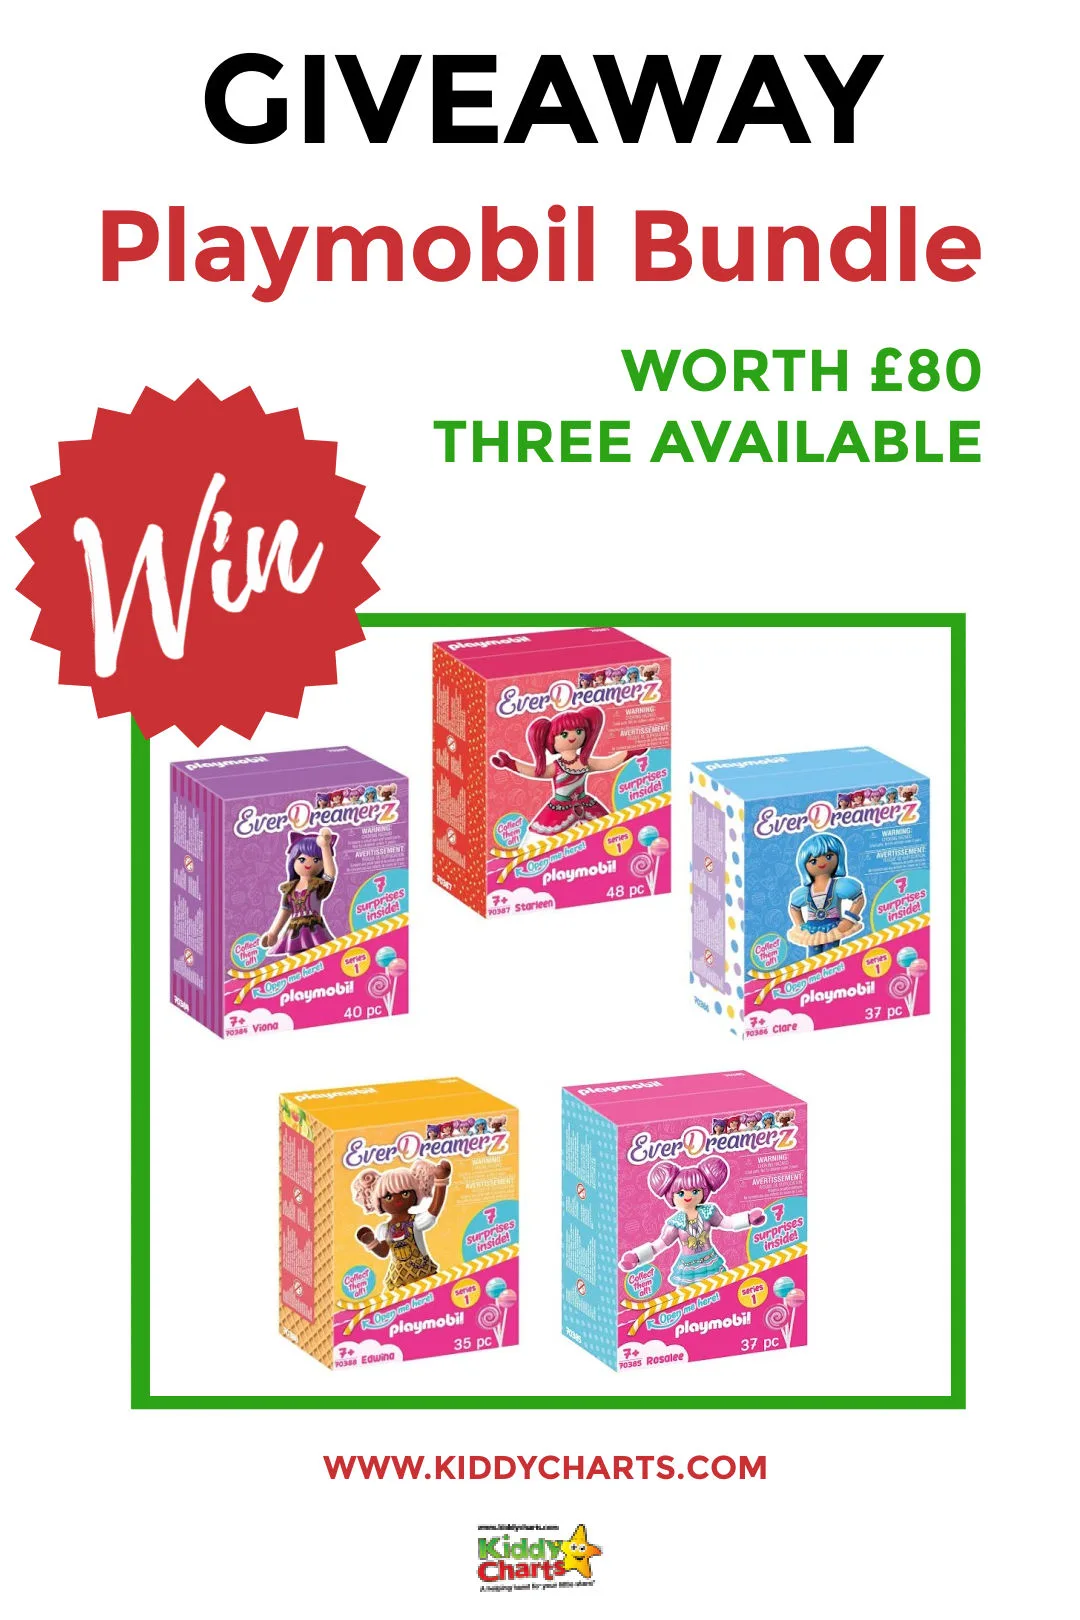 Win £80 Playmobil EverDreamerz bundle: Three to give away!